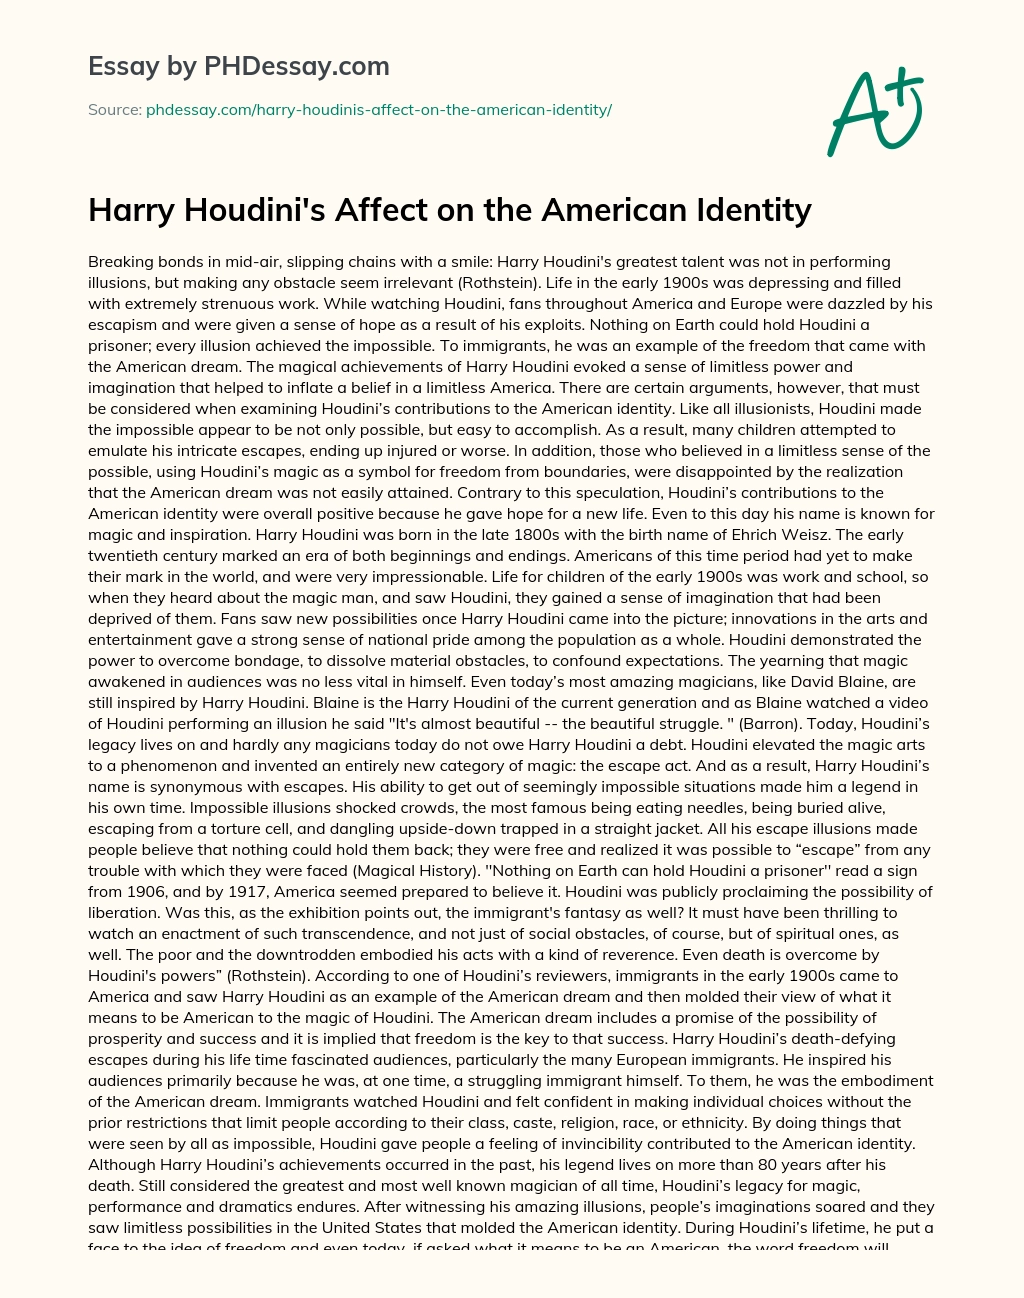 Harry Houdini’s Affect on the American Identity essay